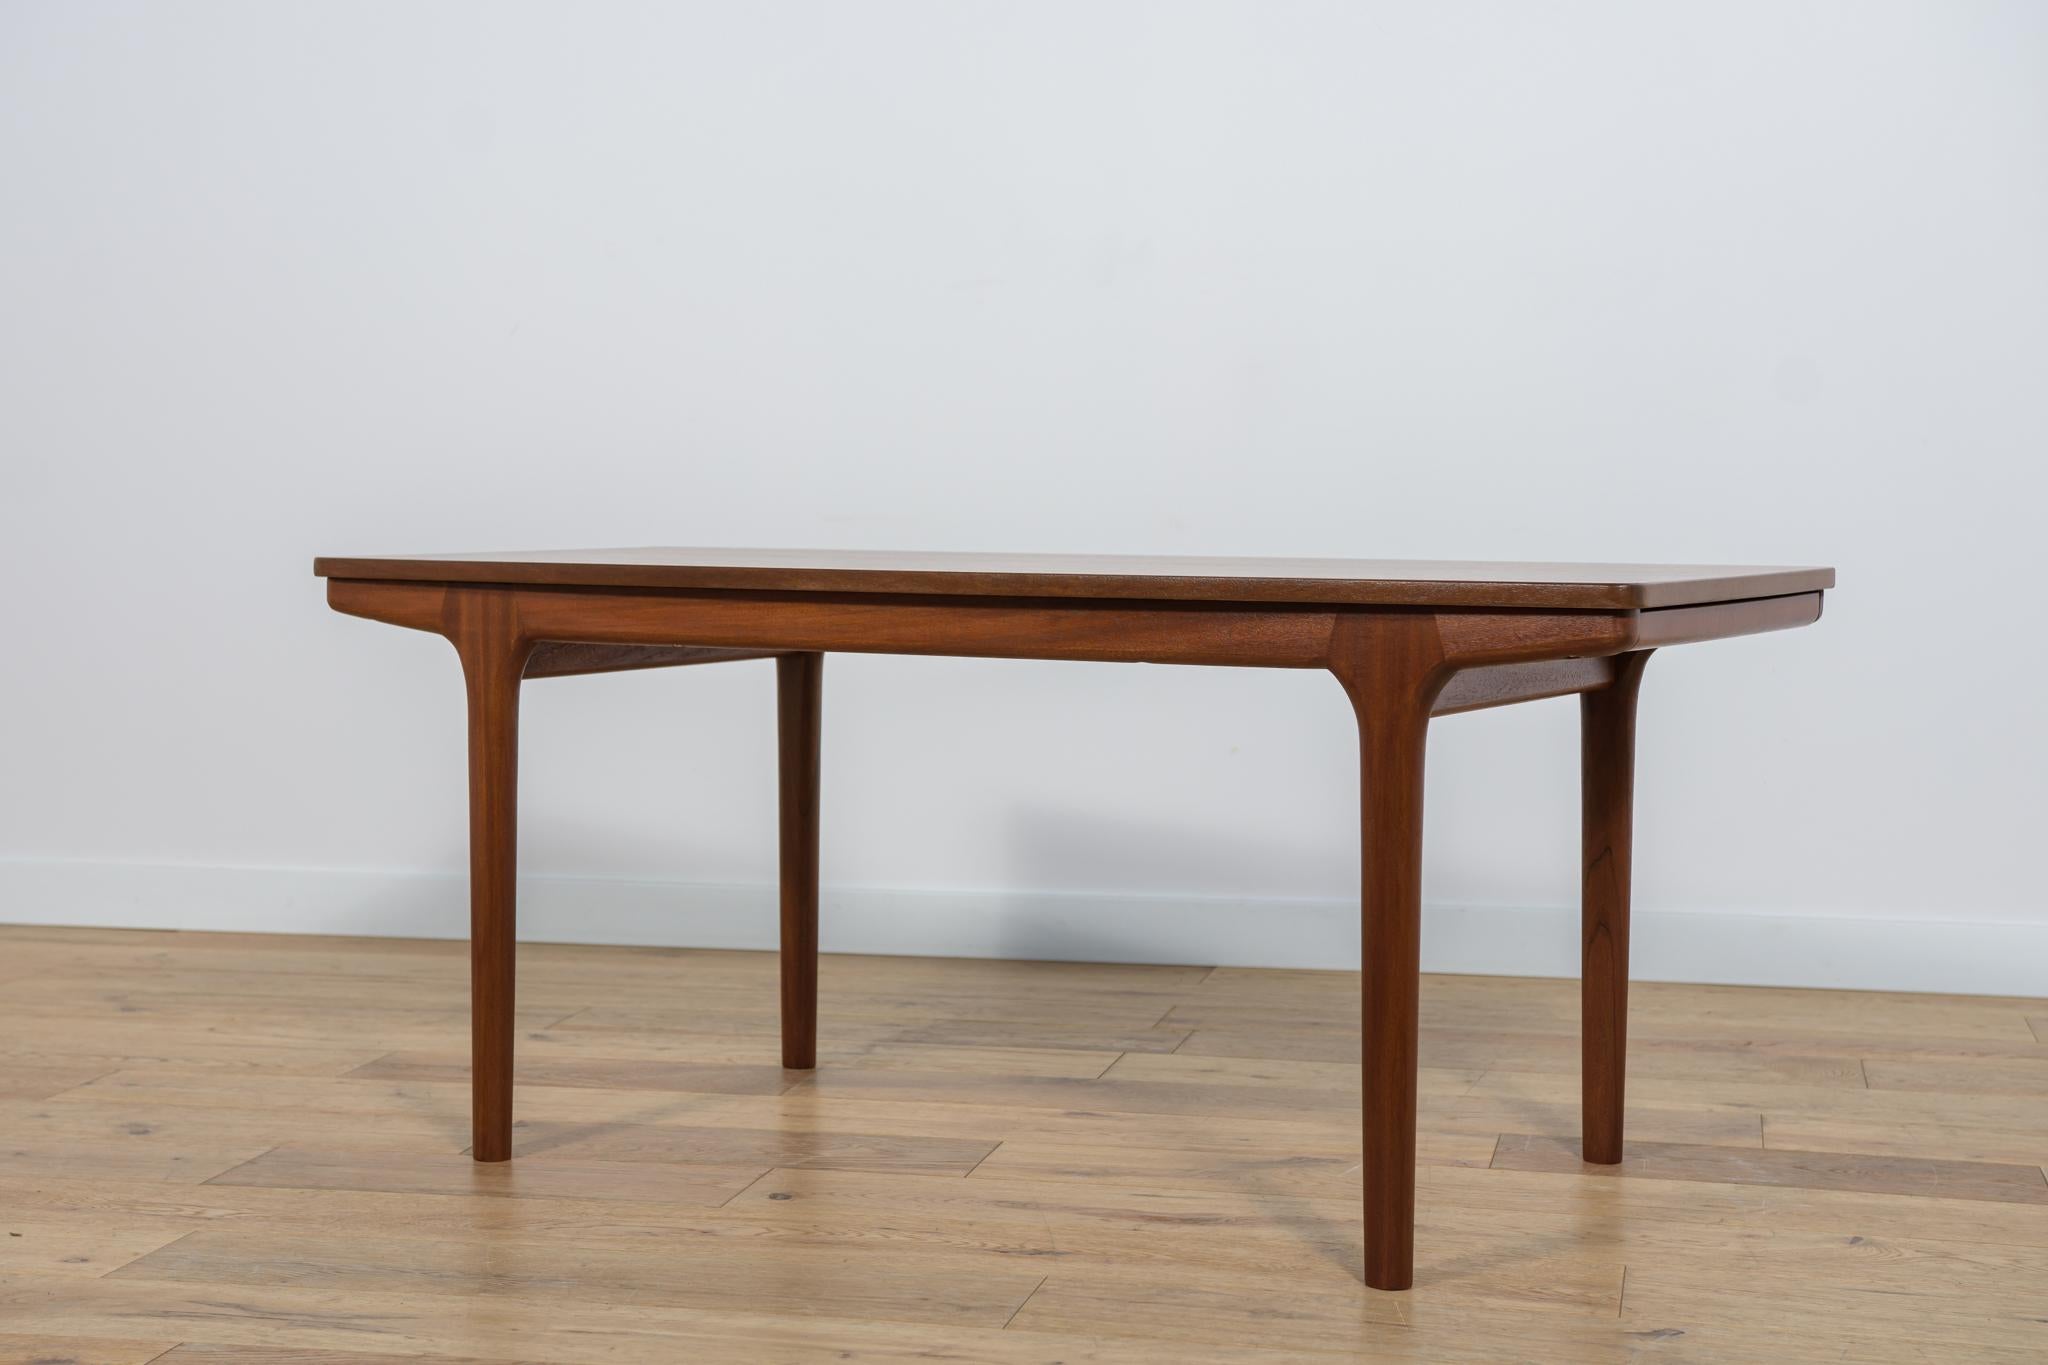 British Mid-Century Teak Coffee Table from McIntosh, 1960s For Sale